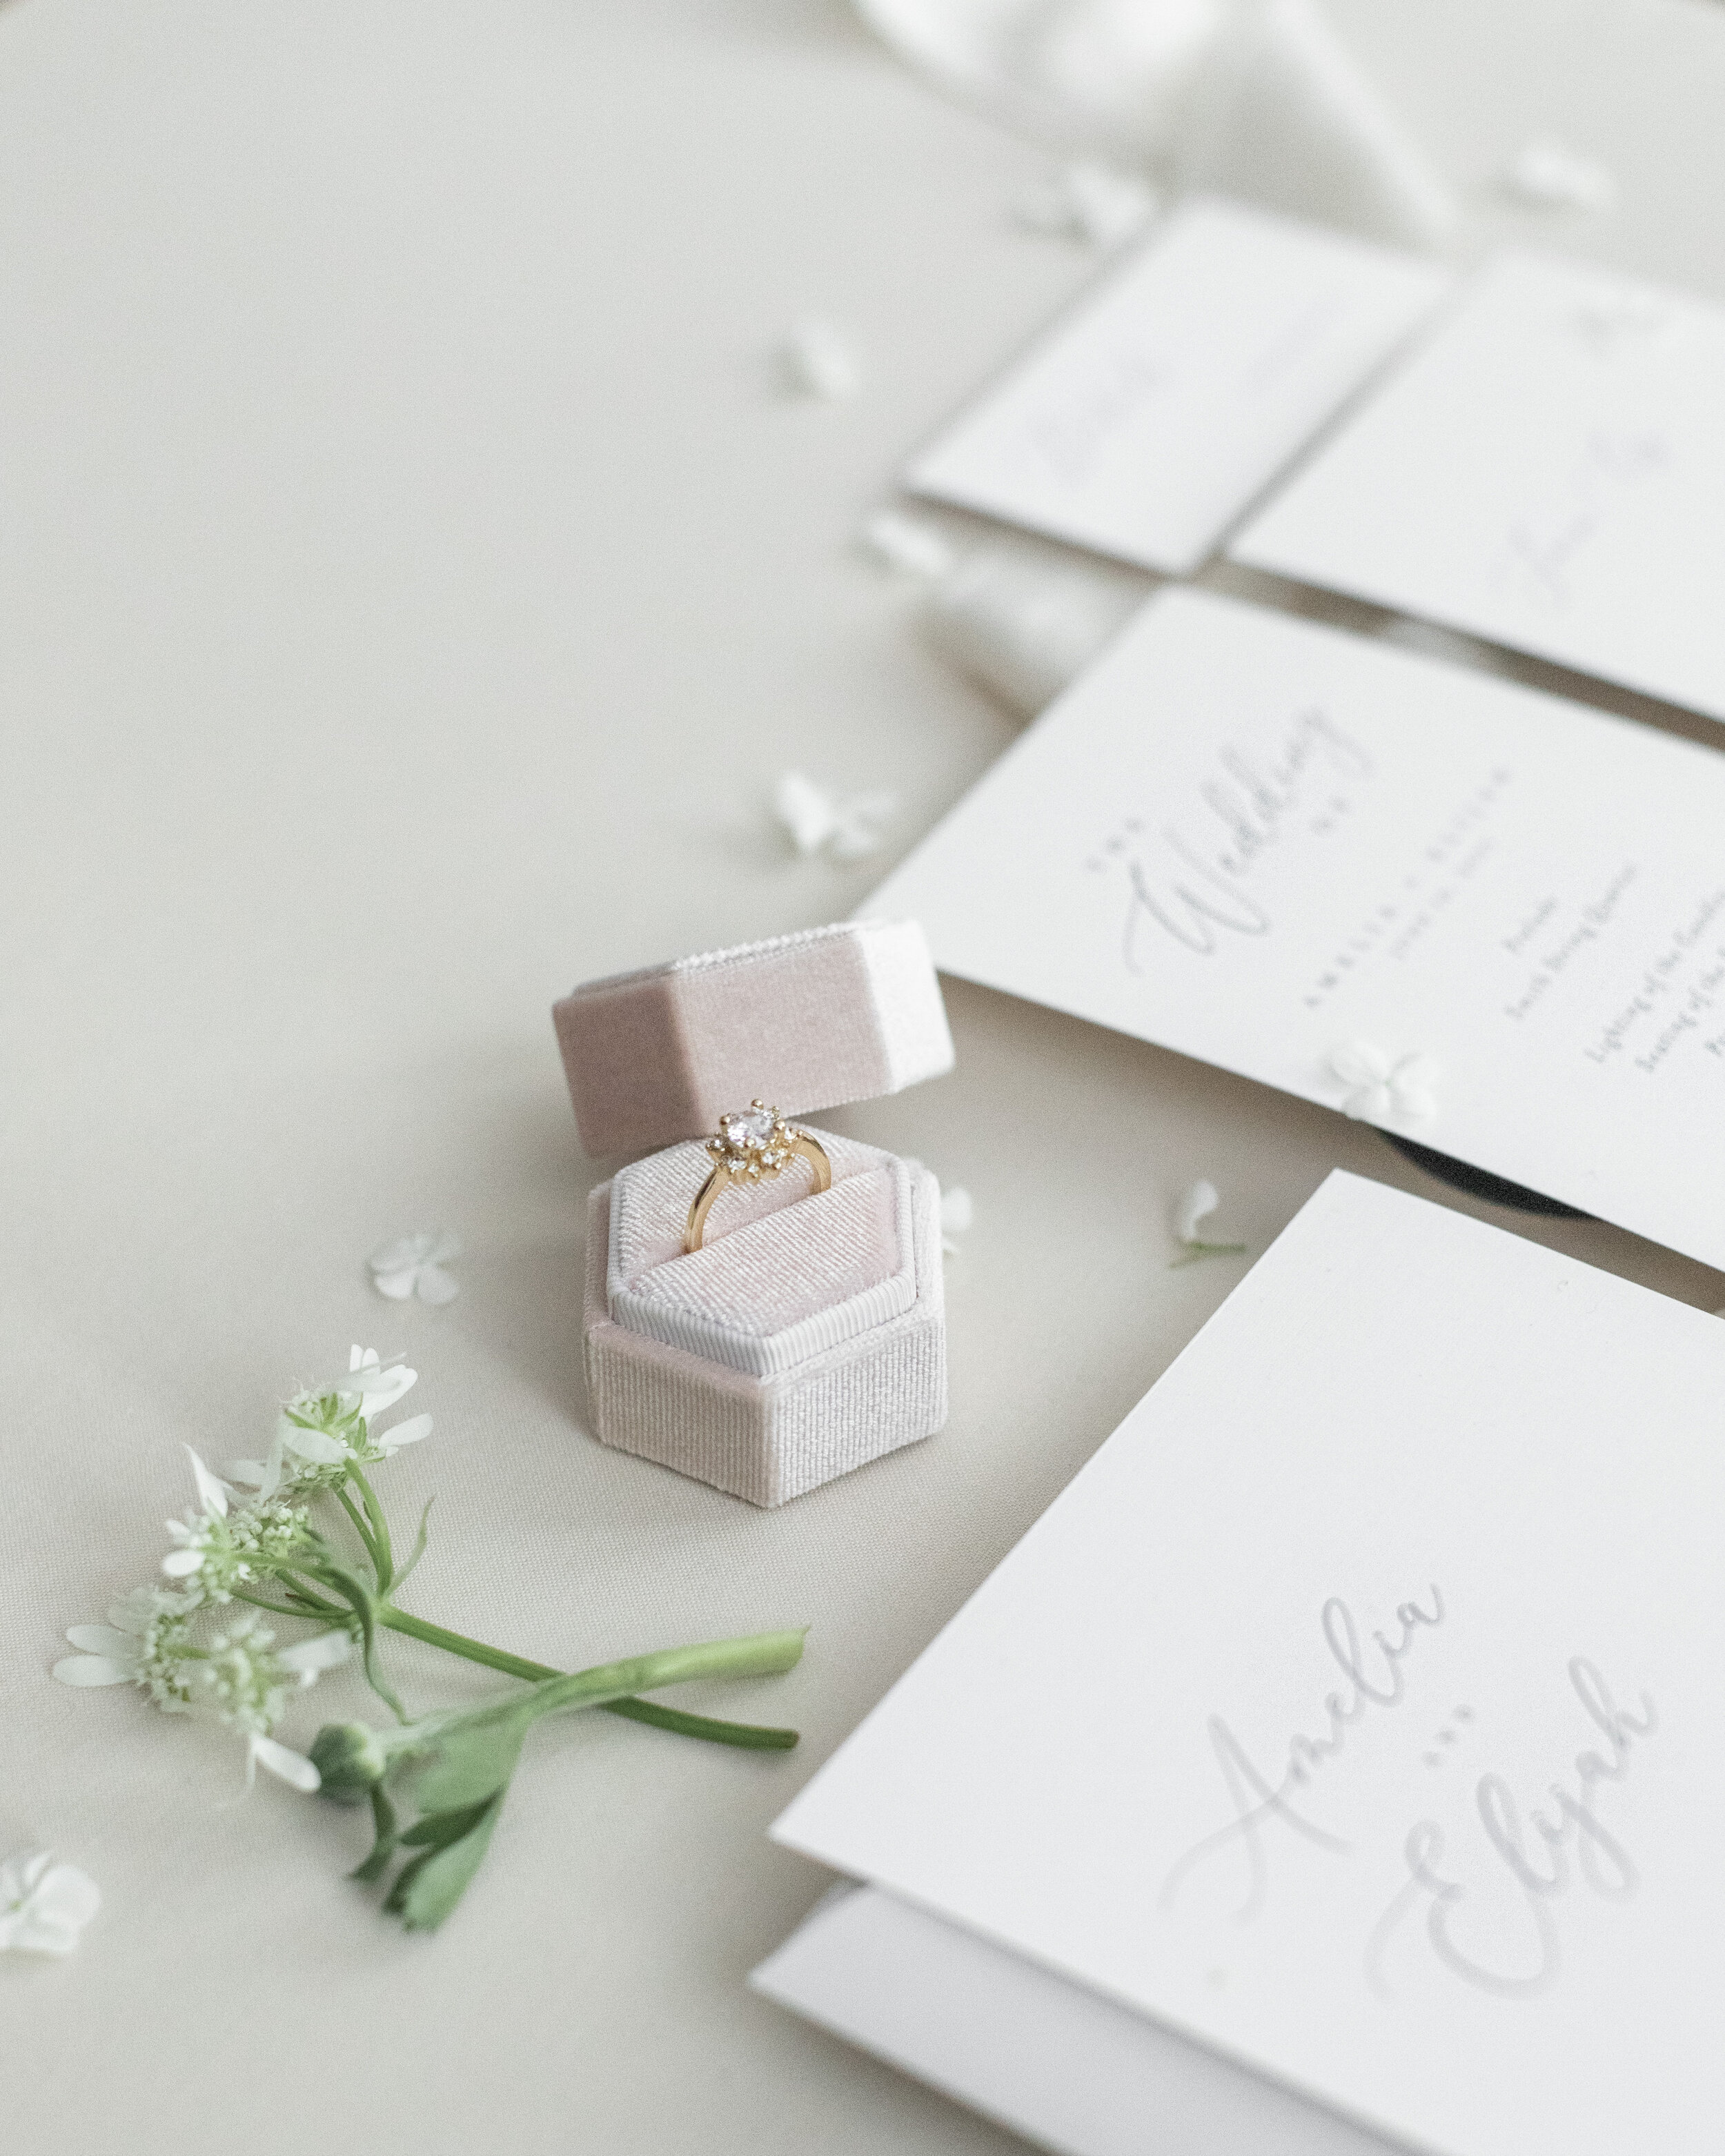  A flat lay photograph of wedding invites and gold wedding ring in a pink box by Clarity Lane Photography during a photography mastermind in Cache Valley. wedding ring flat-lay inspiration #claritylanephotography #claritylaneweddings #claritylanework